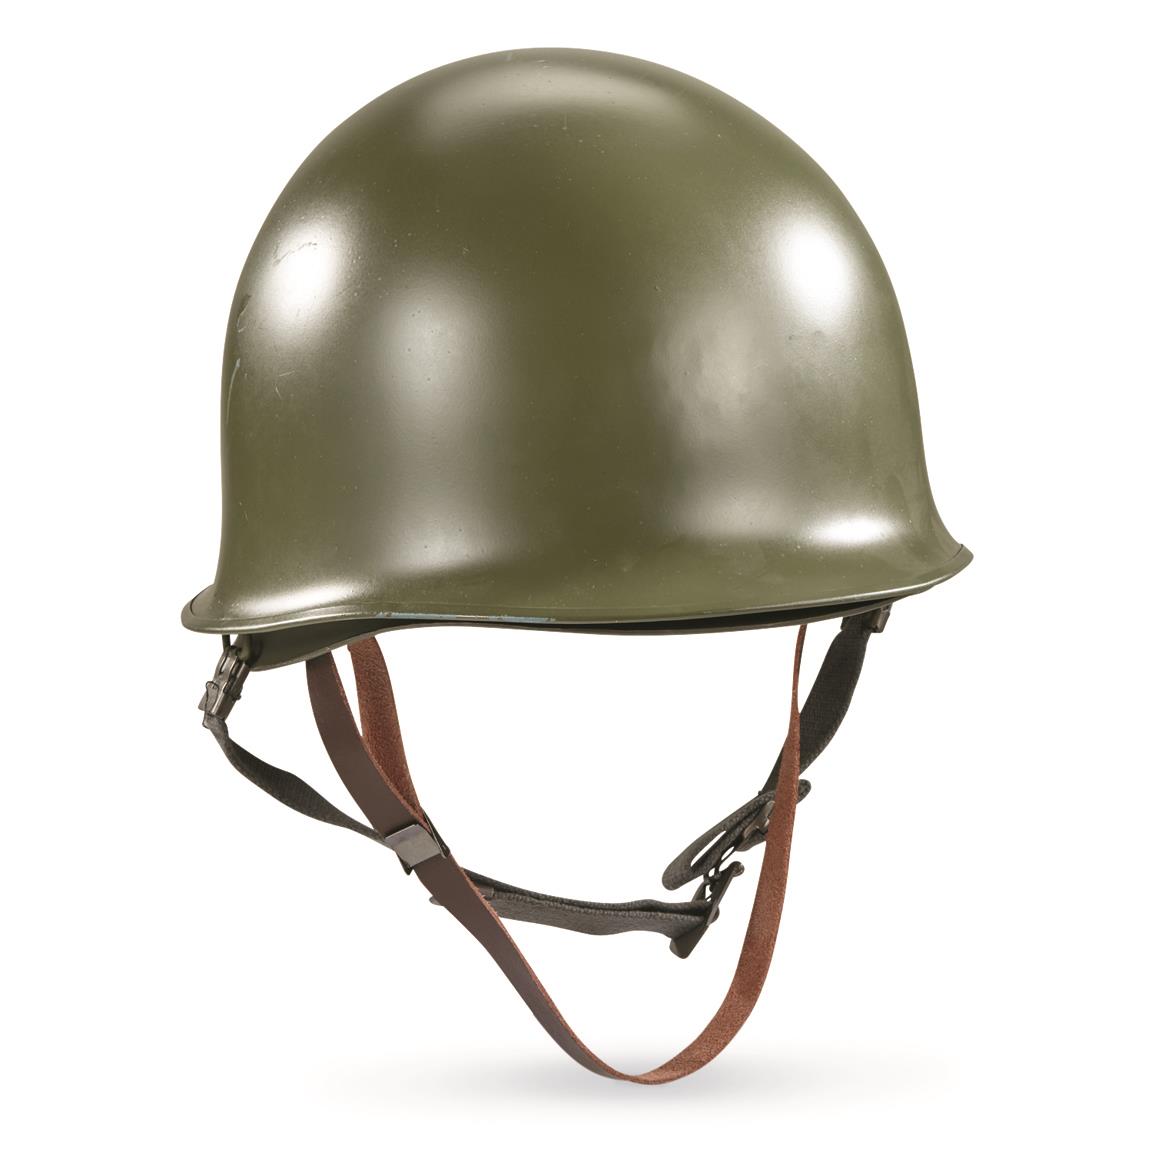 U.S. Military Style M1 Metal Helmet with Plastic Liner and Camo Cover